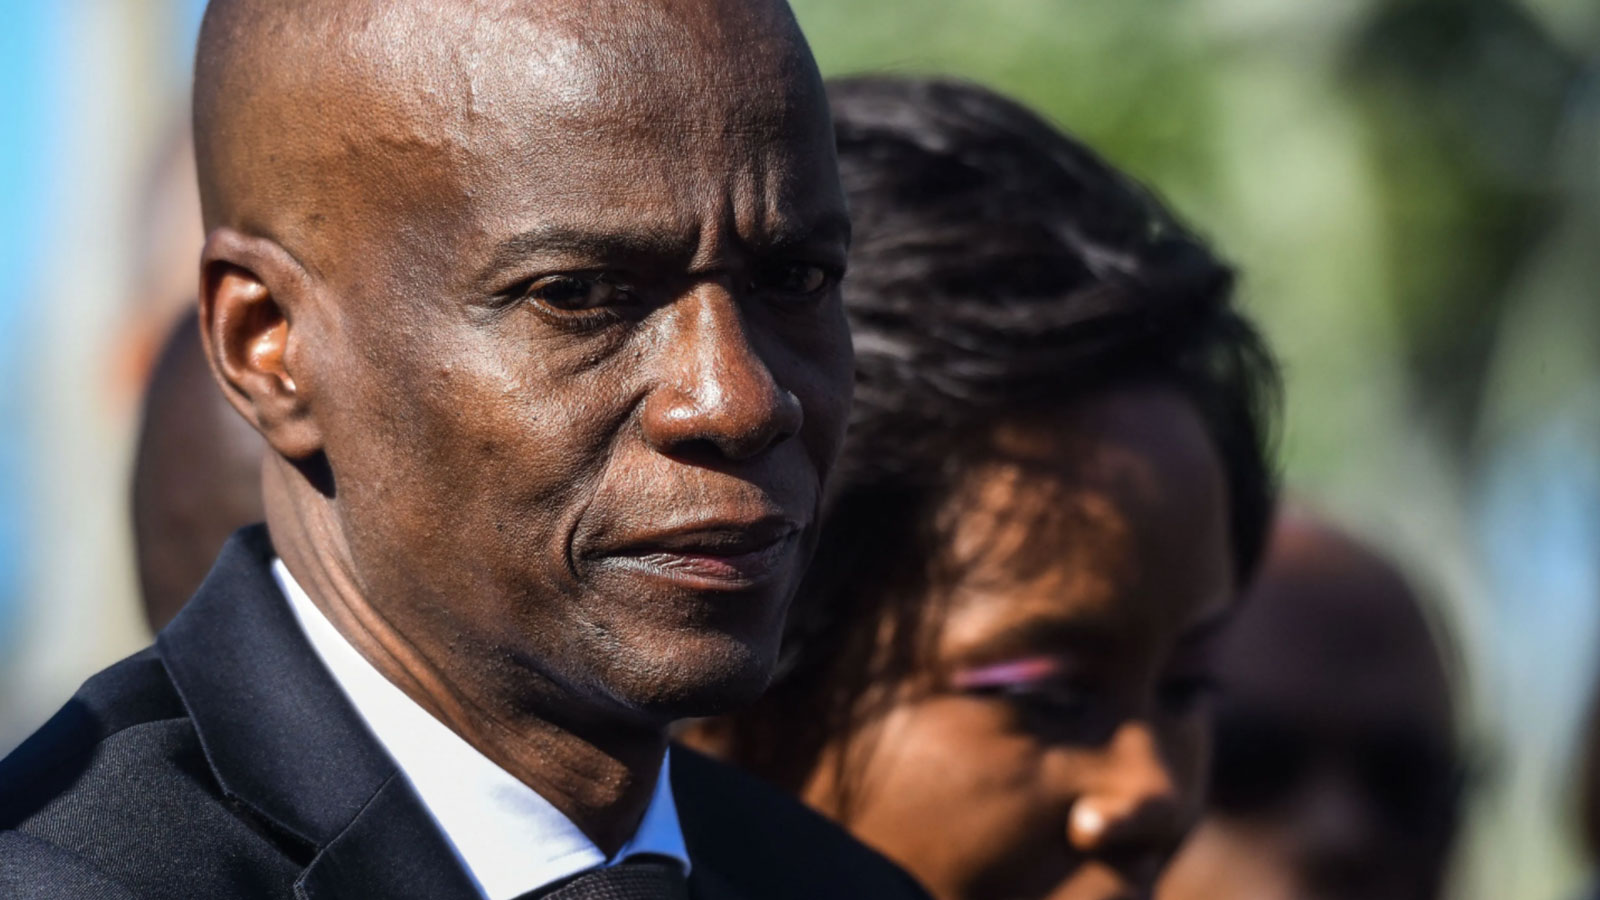 Haitian President Jovenel Moïse assassinated in attack on his home